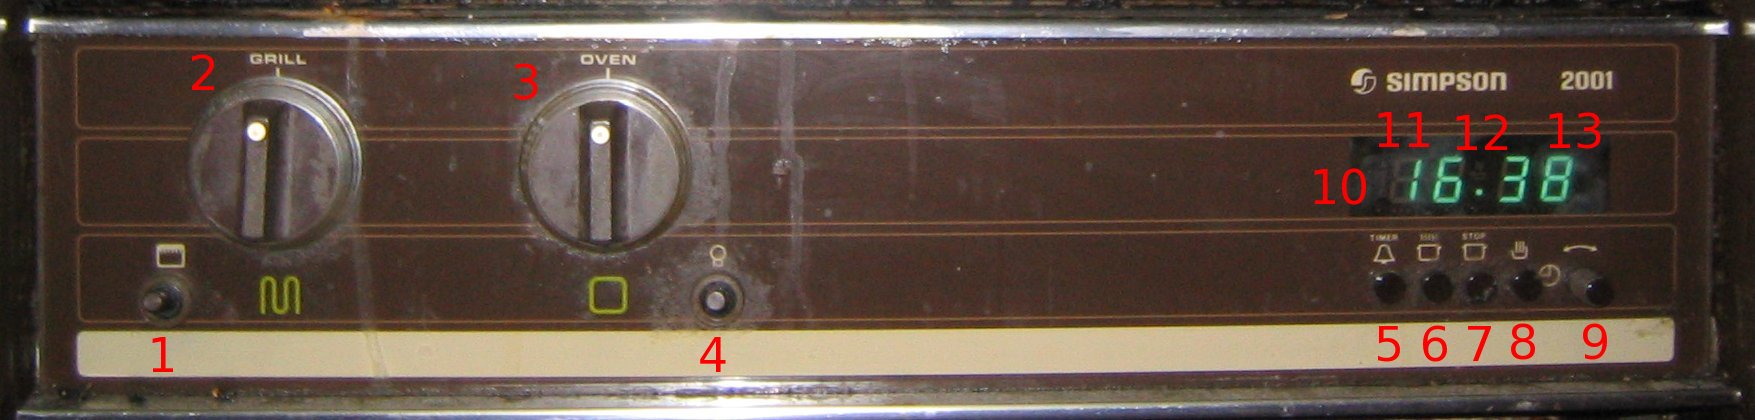 Annotated image of the controls of a Simpson 2001 oven